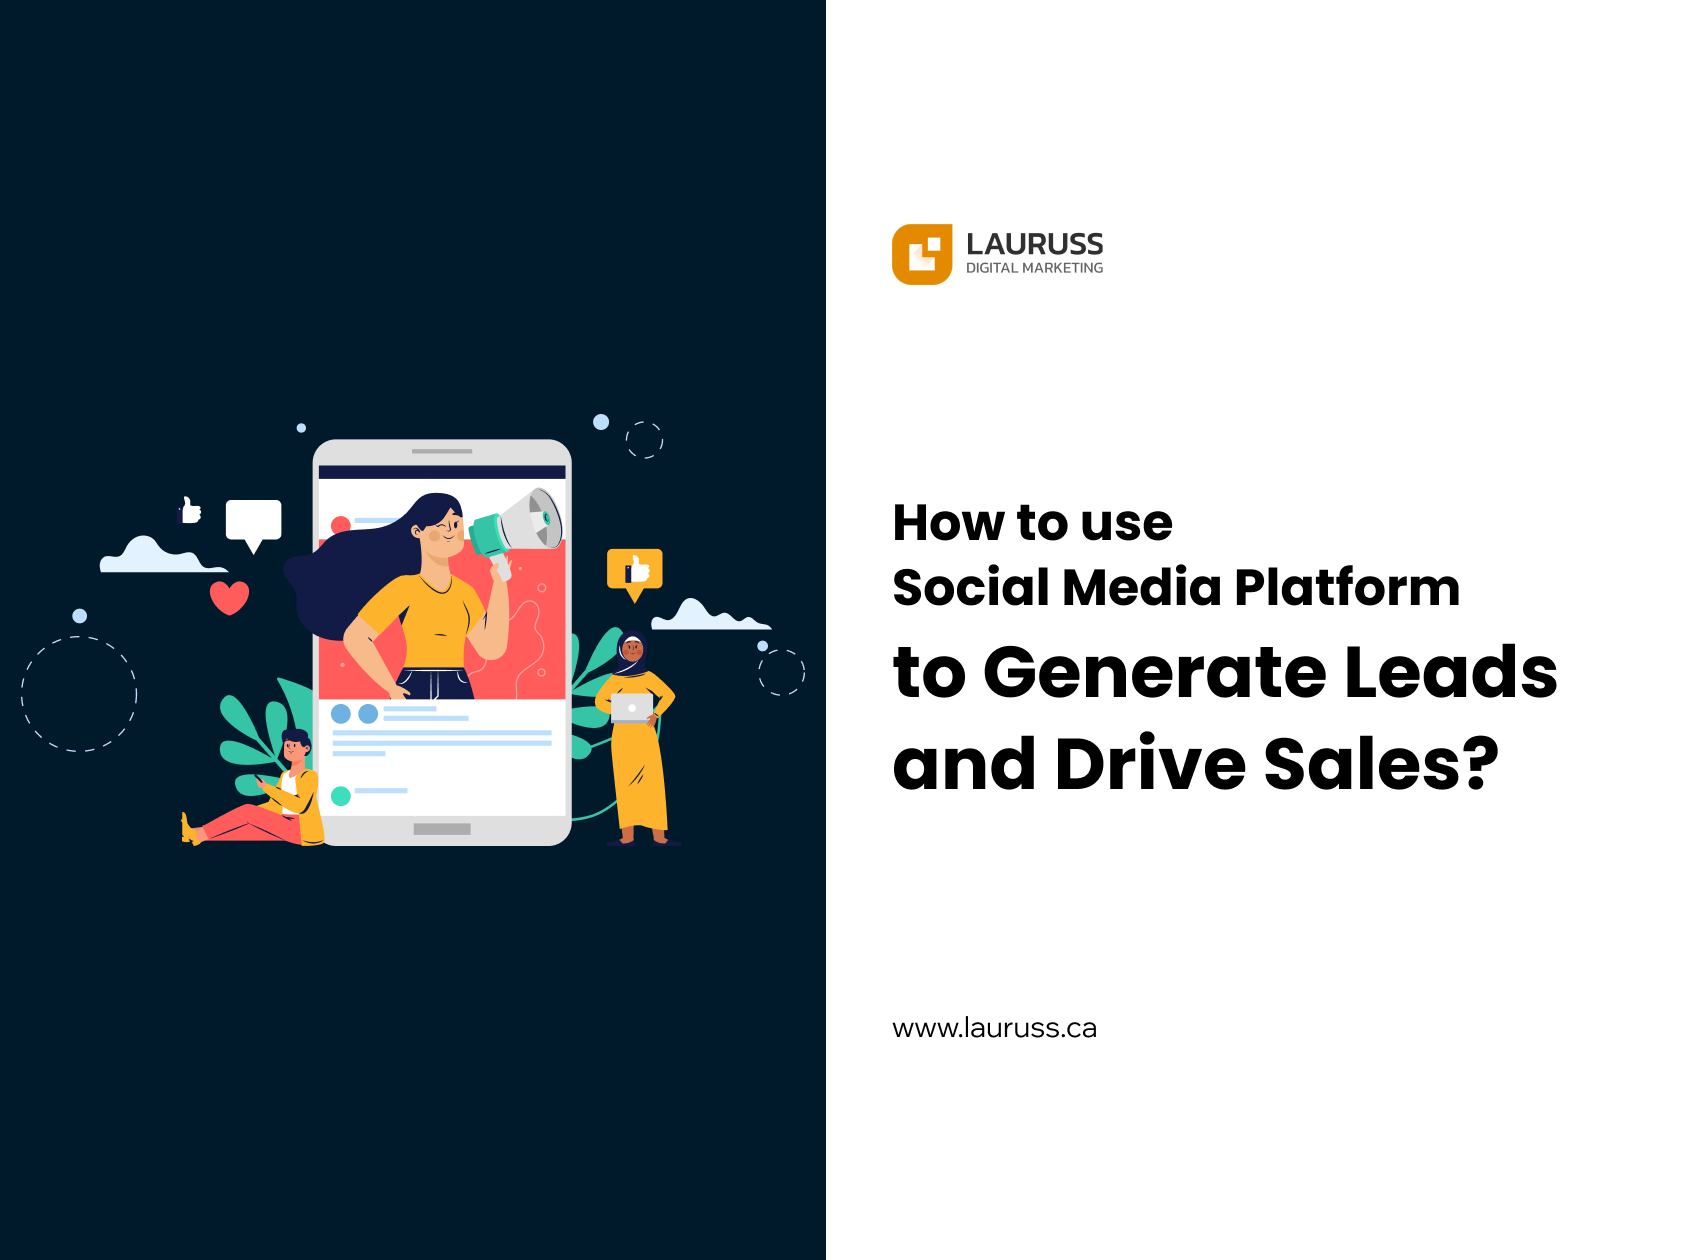 Social media platforms to generate leads